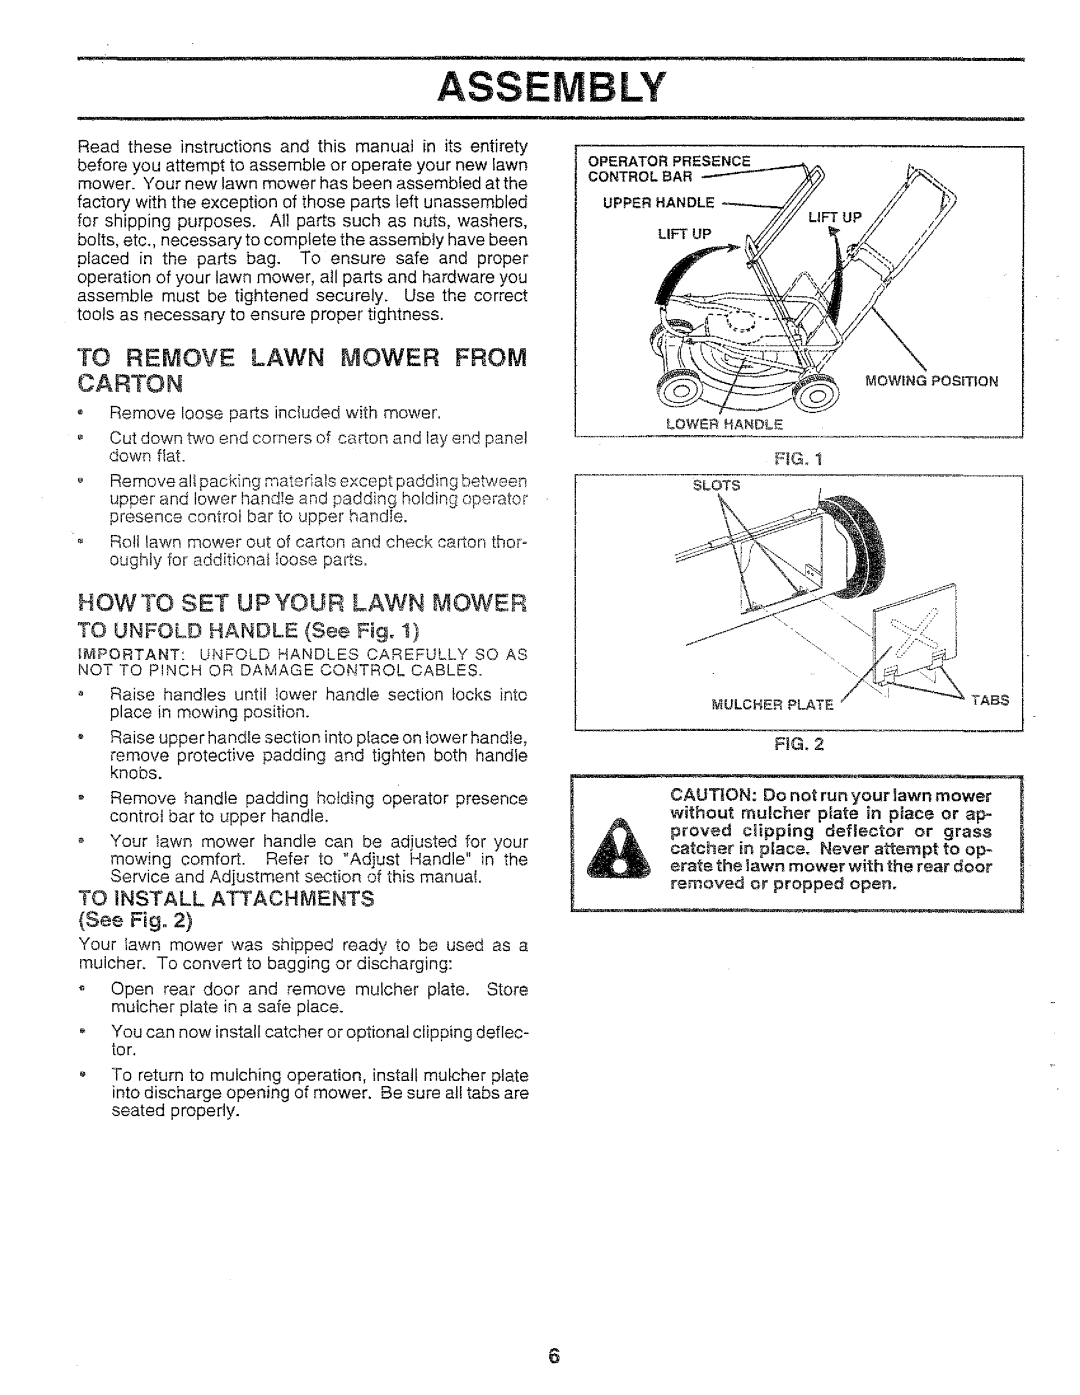 Sears 917.37283 manual Assembly, To Remove Lawn Mower From Carton, Howto Set Upyour Lawn Mower, TO UNFOLD HANDLE See Fig 